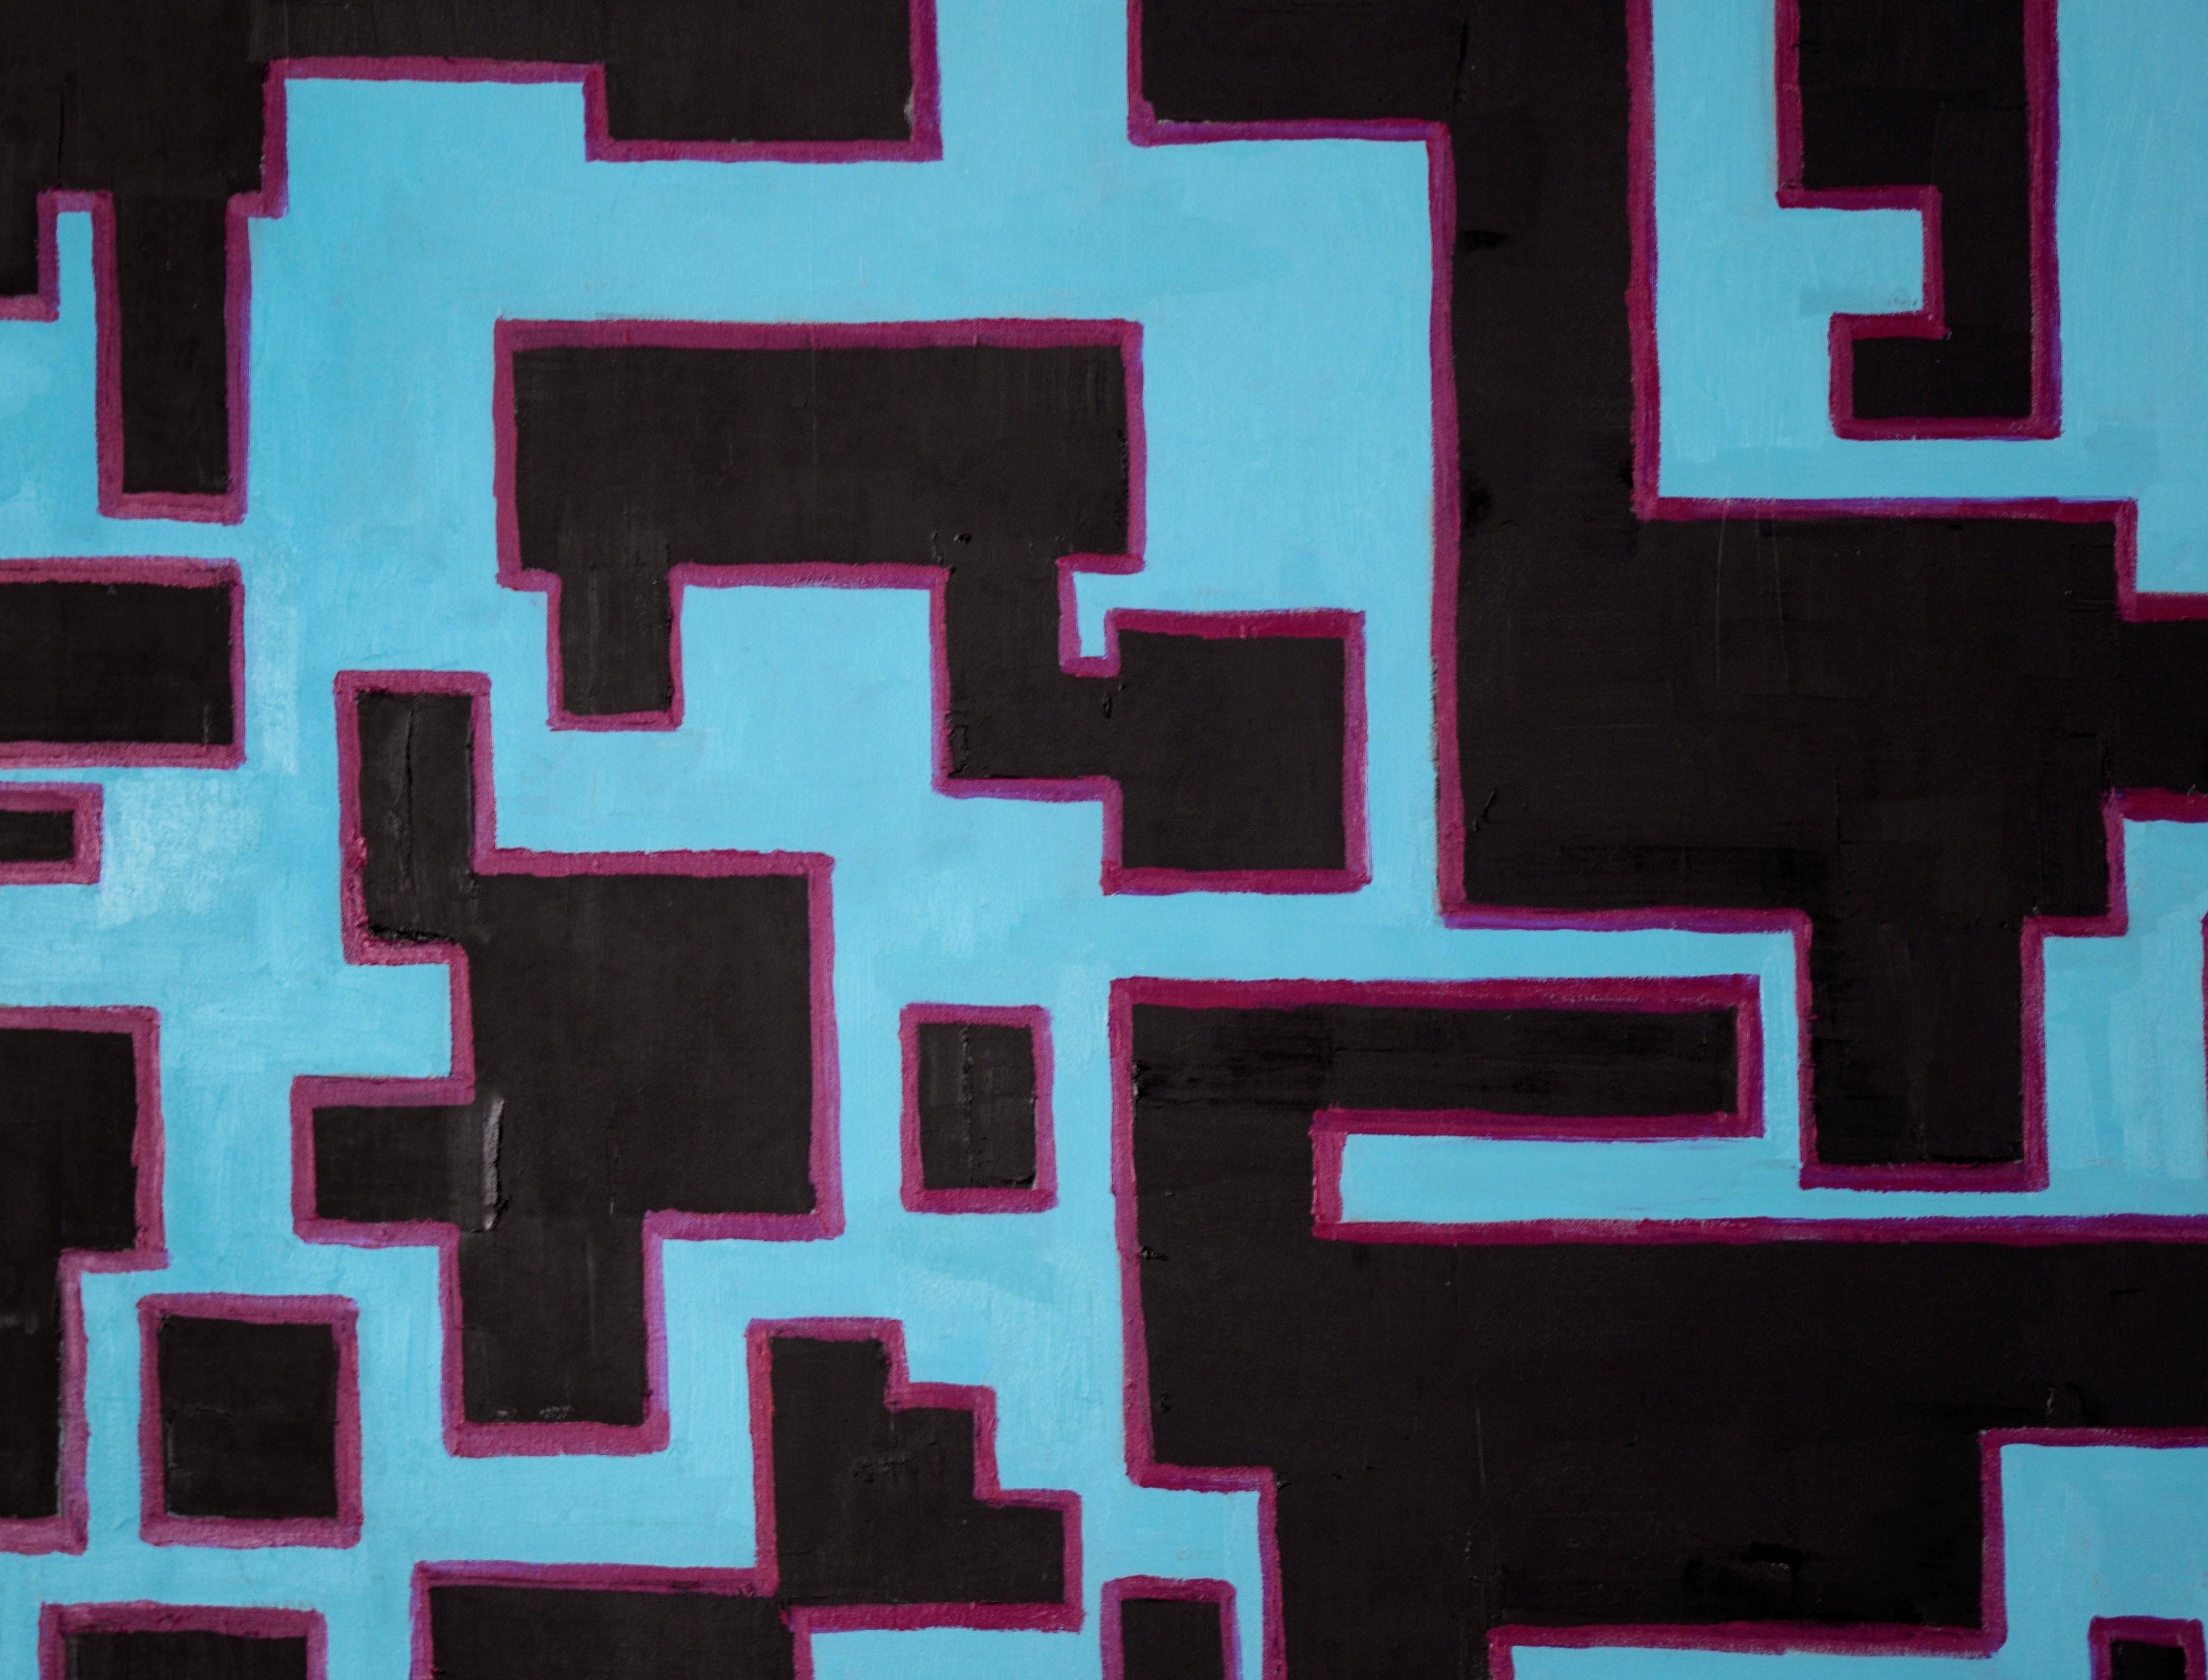 Large-scale contemporary abstract of bold rectilinear shapes in black on a sky blue background with fun magenta accents by Bay Area artist Michael Pauker (American, b.1957). Unsigned, but was acquired with a collection of the artist's work.